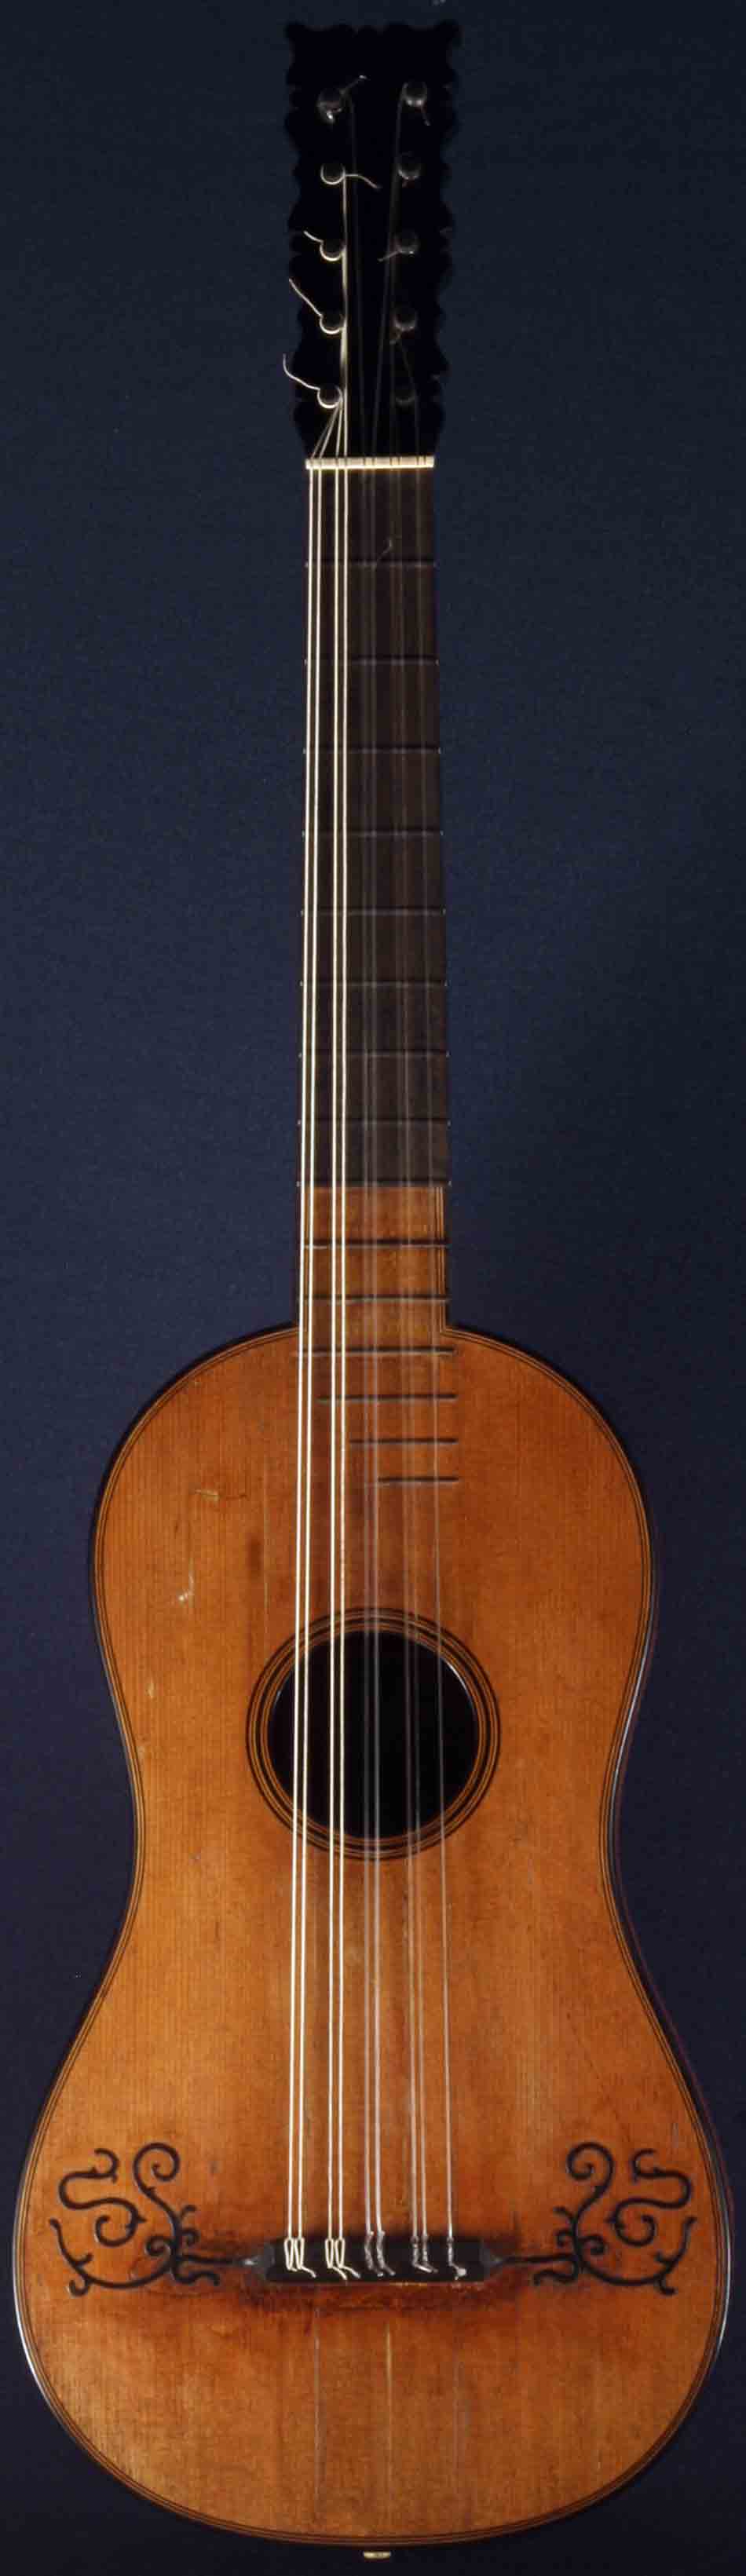 Early Musical Instruments part of the Bruderlin Collection, antique 5 course Baroque Guitar by Dietrich Stork around 1770